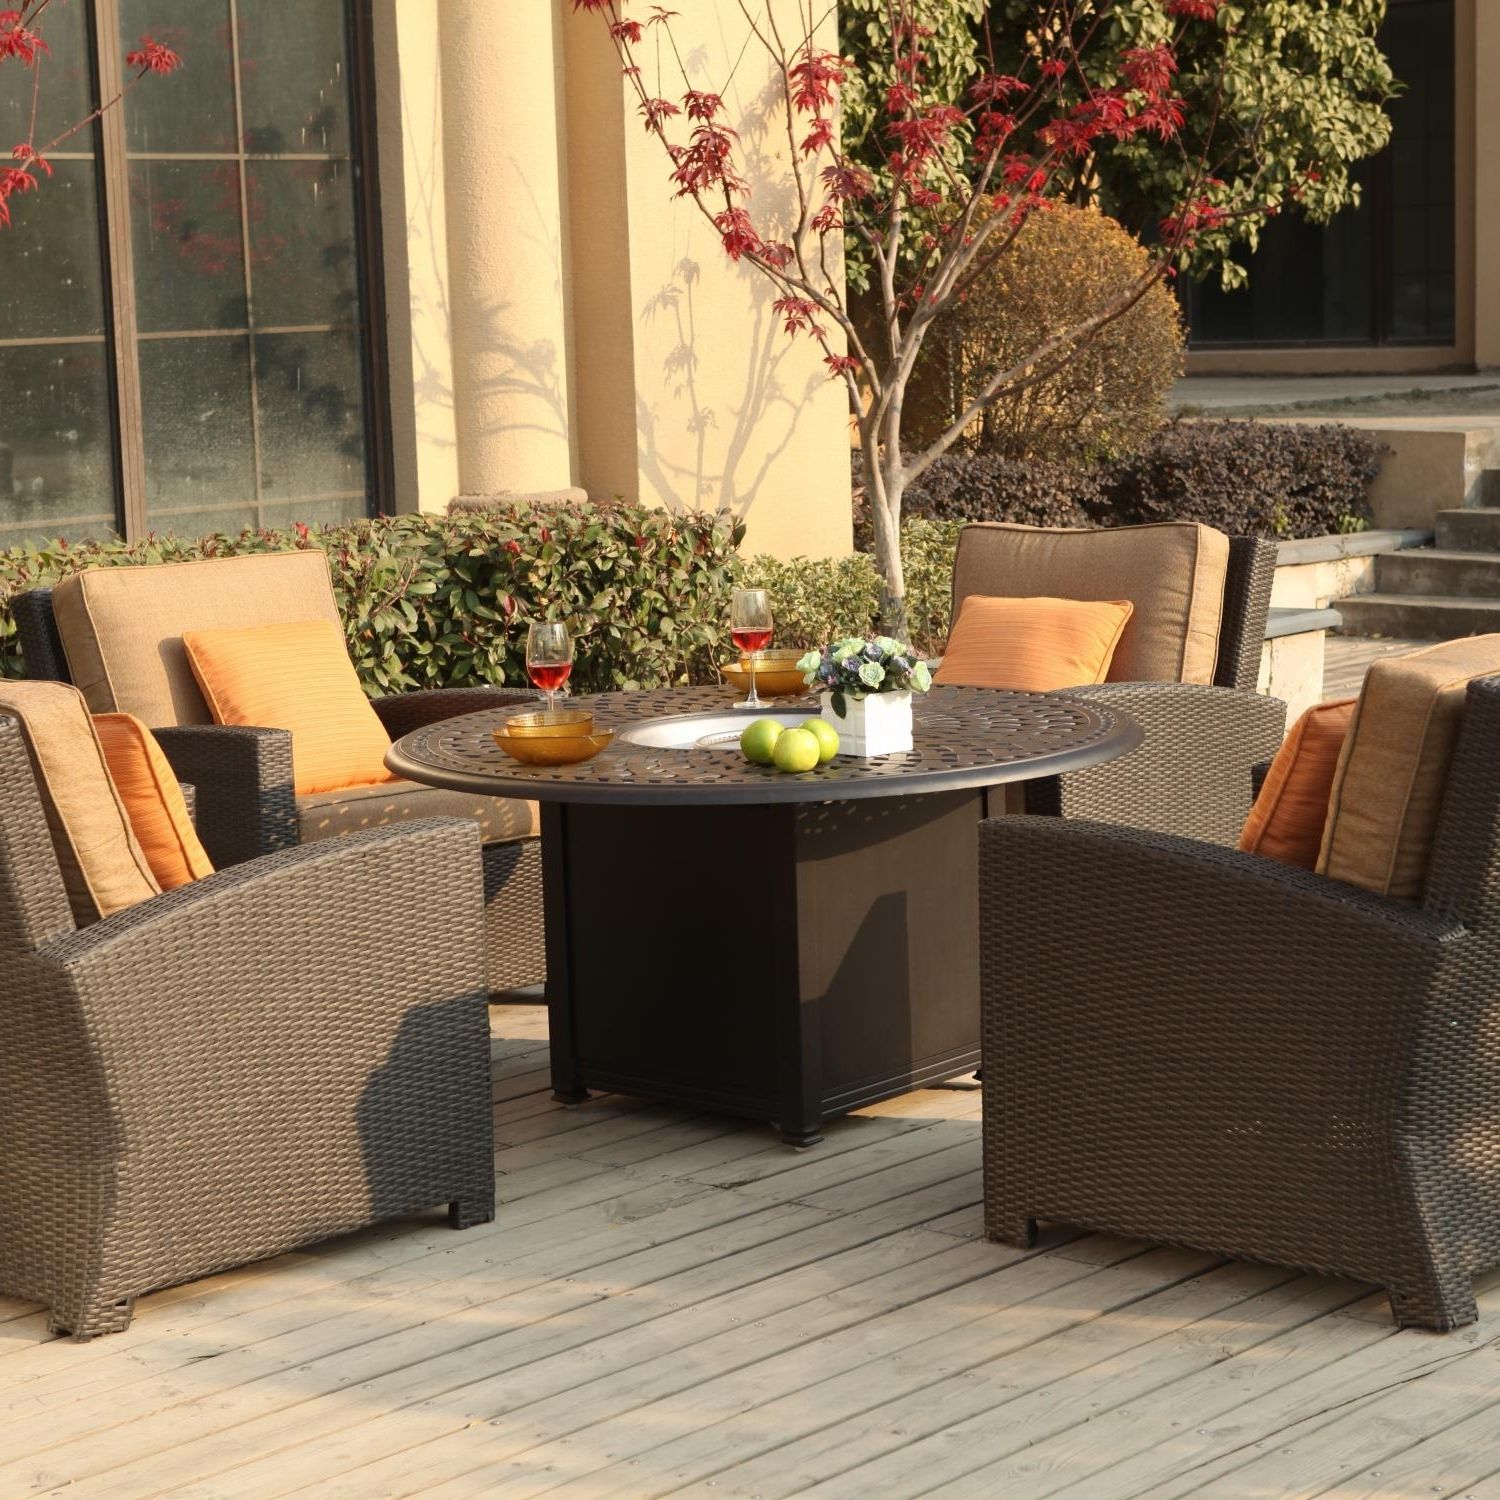 2019 Darlee Vienna 5 Piece Resin Wicker Patio Fire Pit Set Intended For Patio Conversation Sets With Fire Pit Table (View 12 of 20)